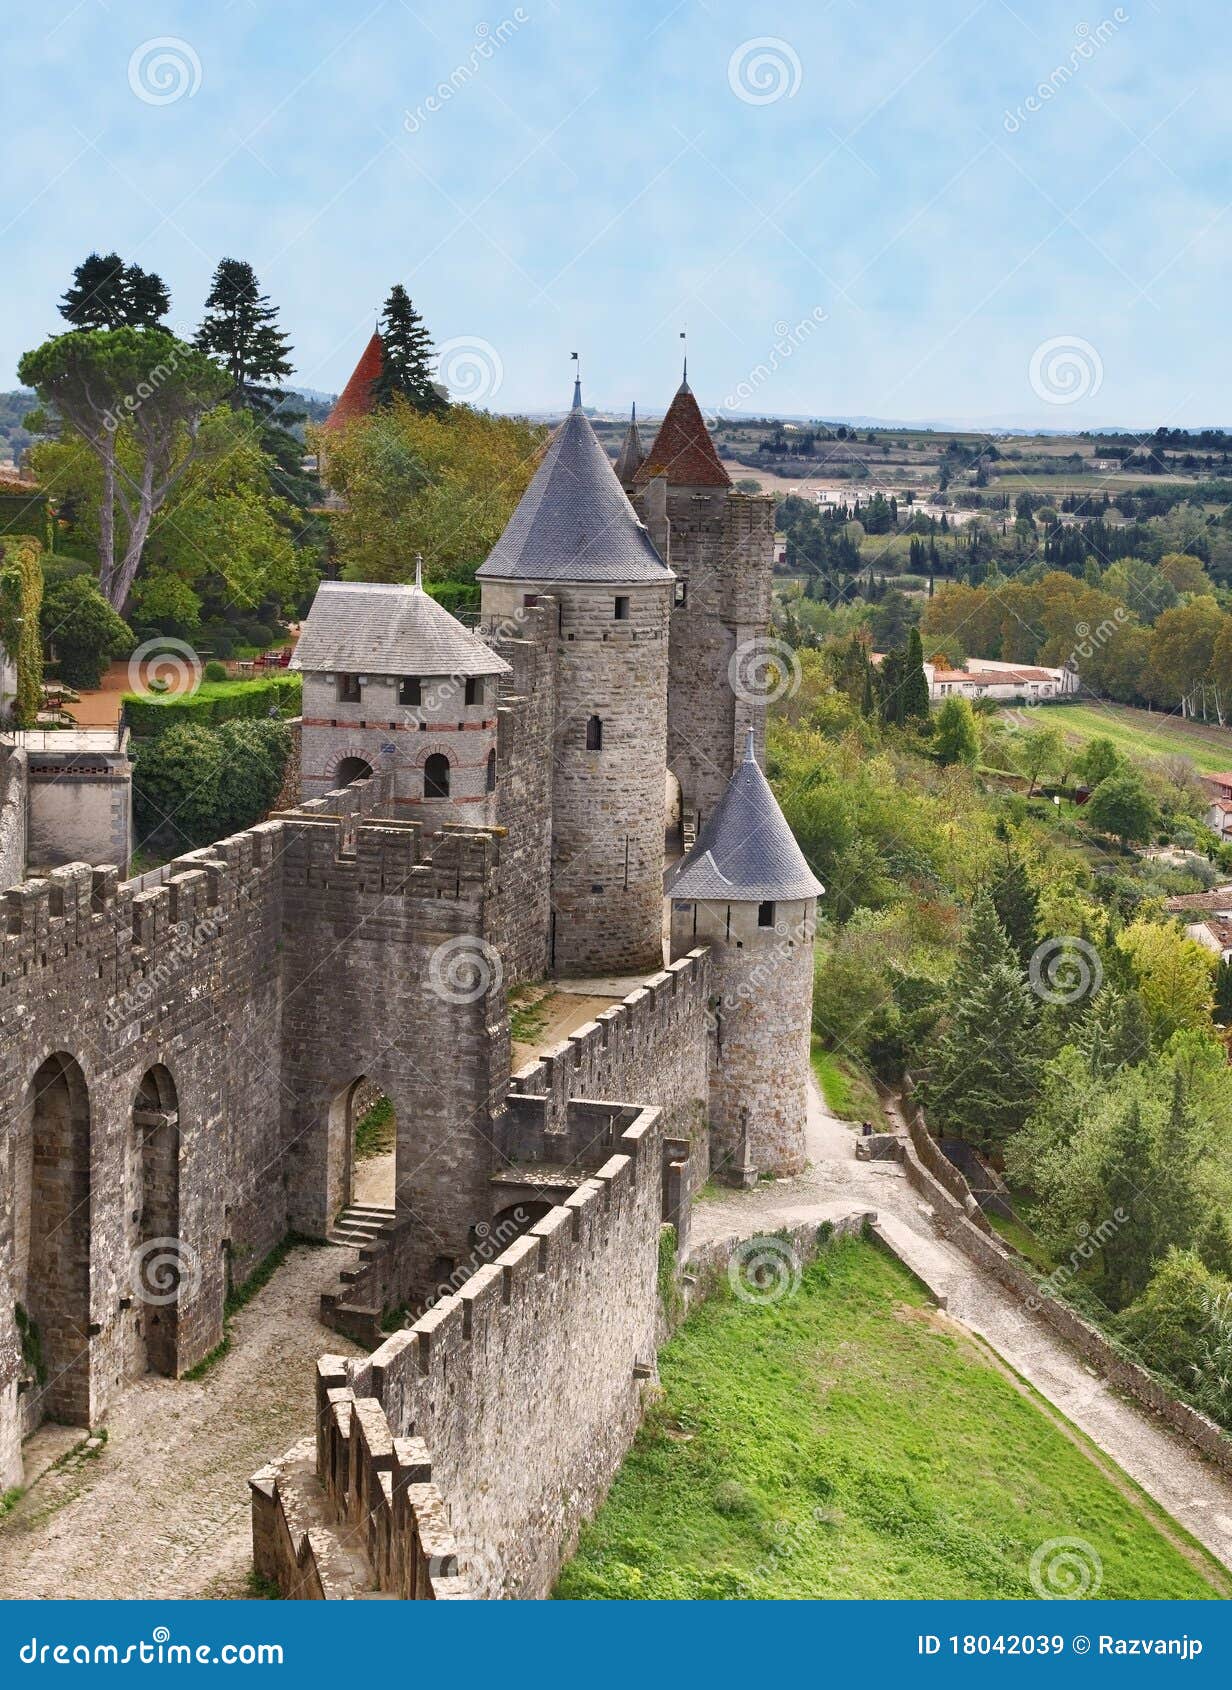 carcassonne-the fortified town